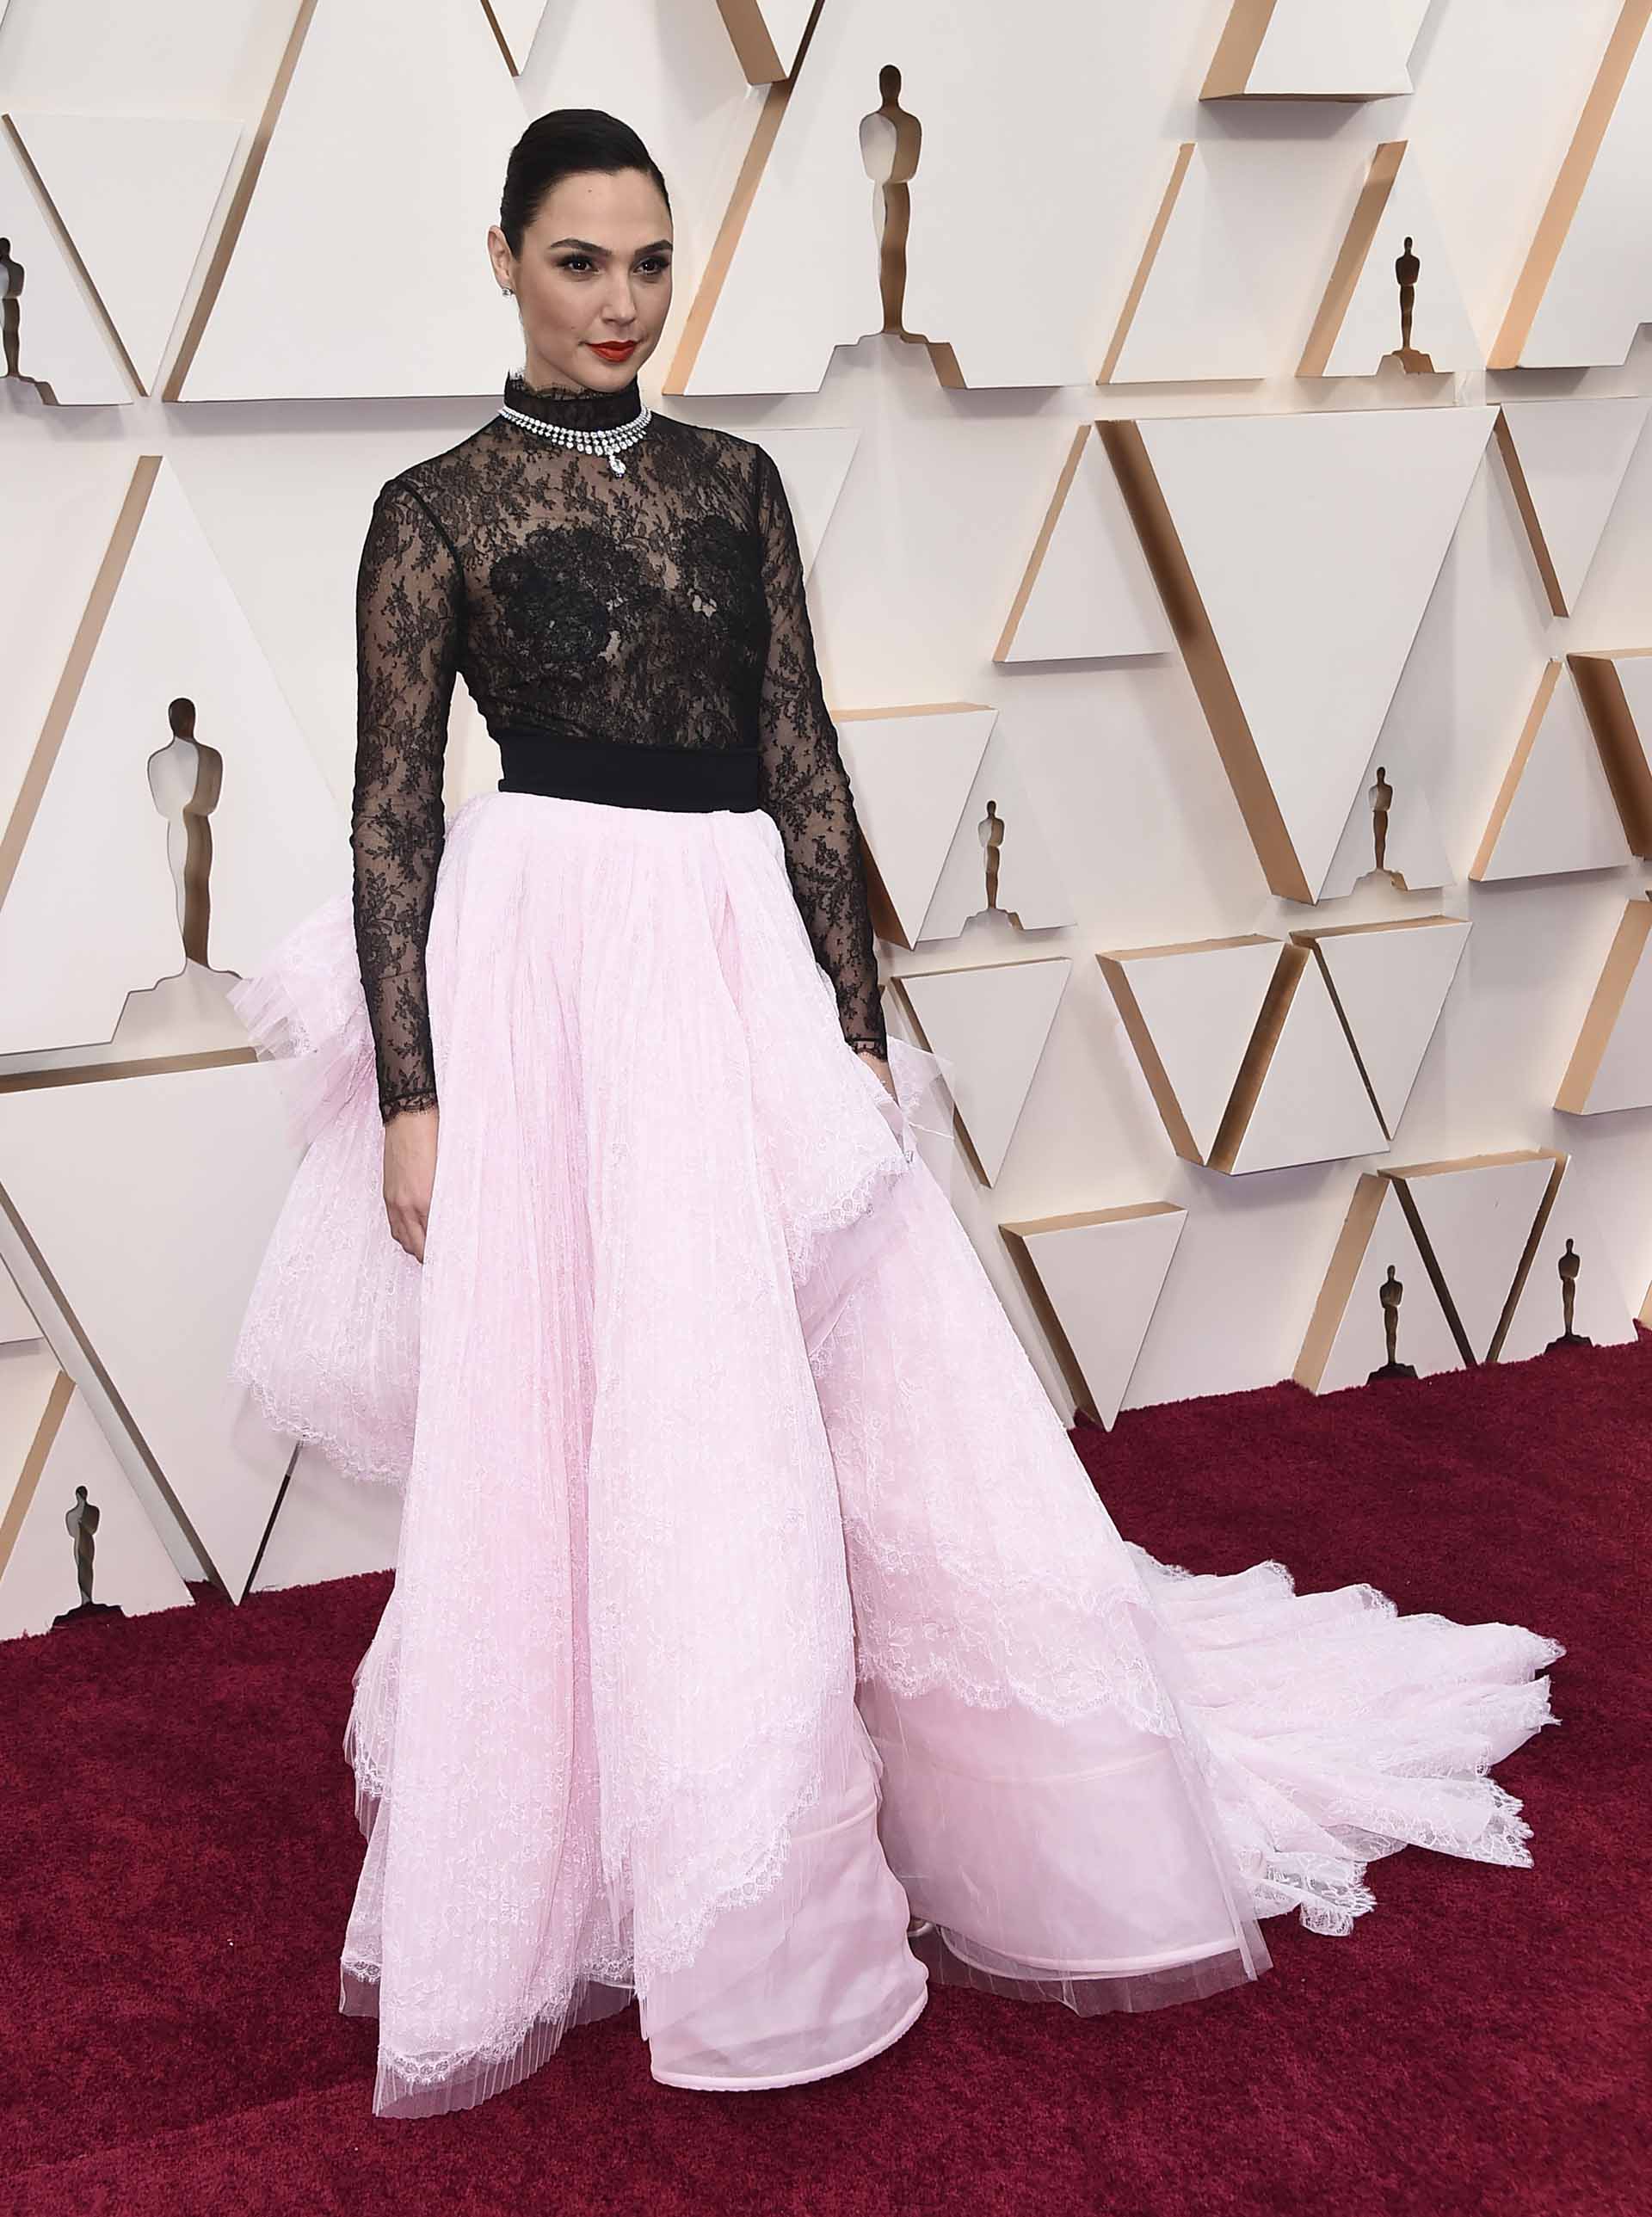 Actress Gal Gadot  at the 92nd Academy Awards in Hollywood, Los Angeles, California, U.S., February 9, 2020